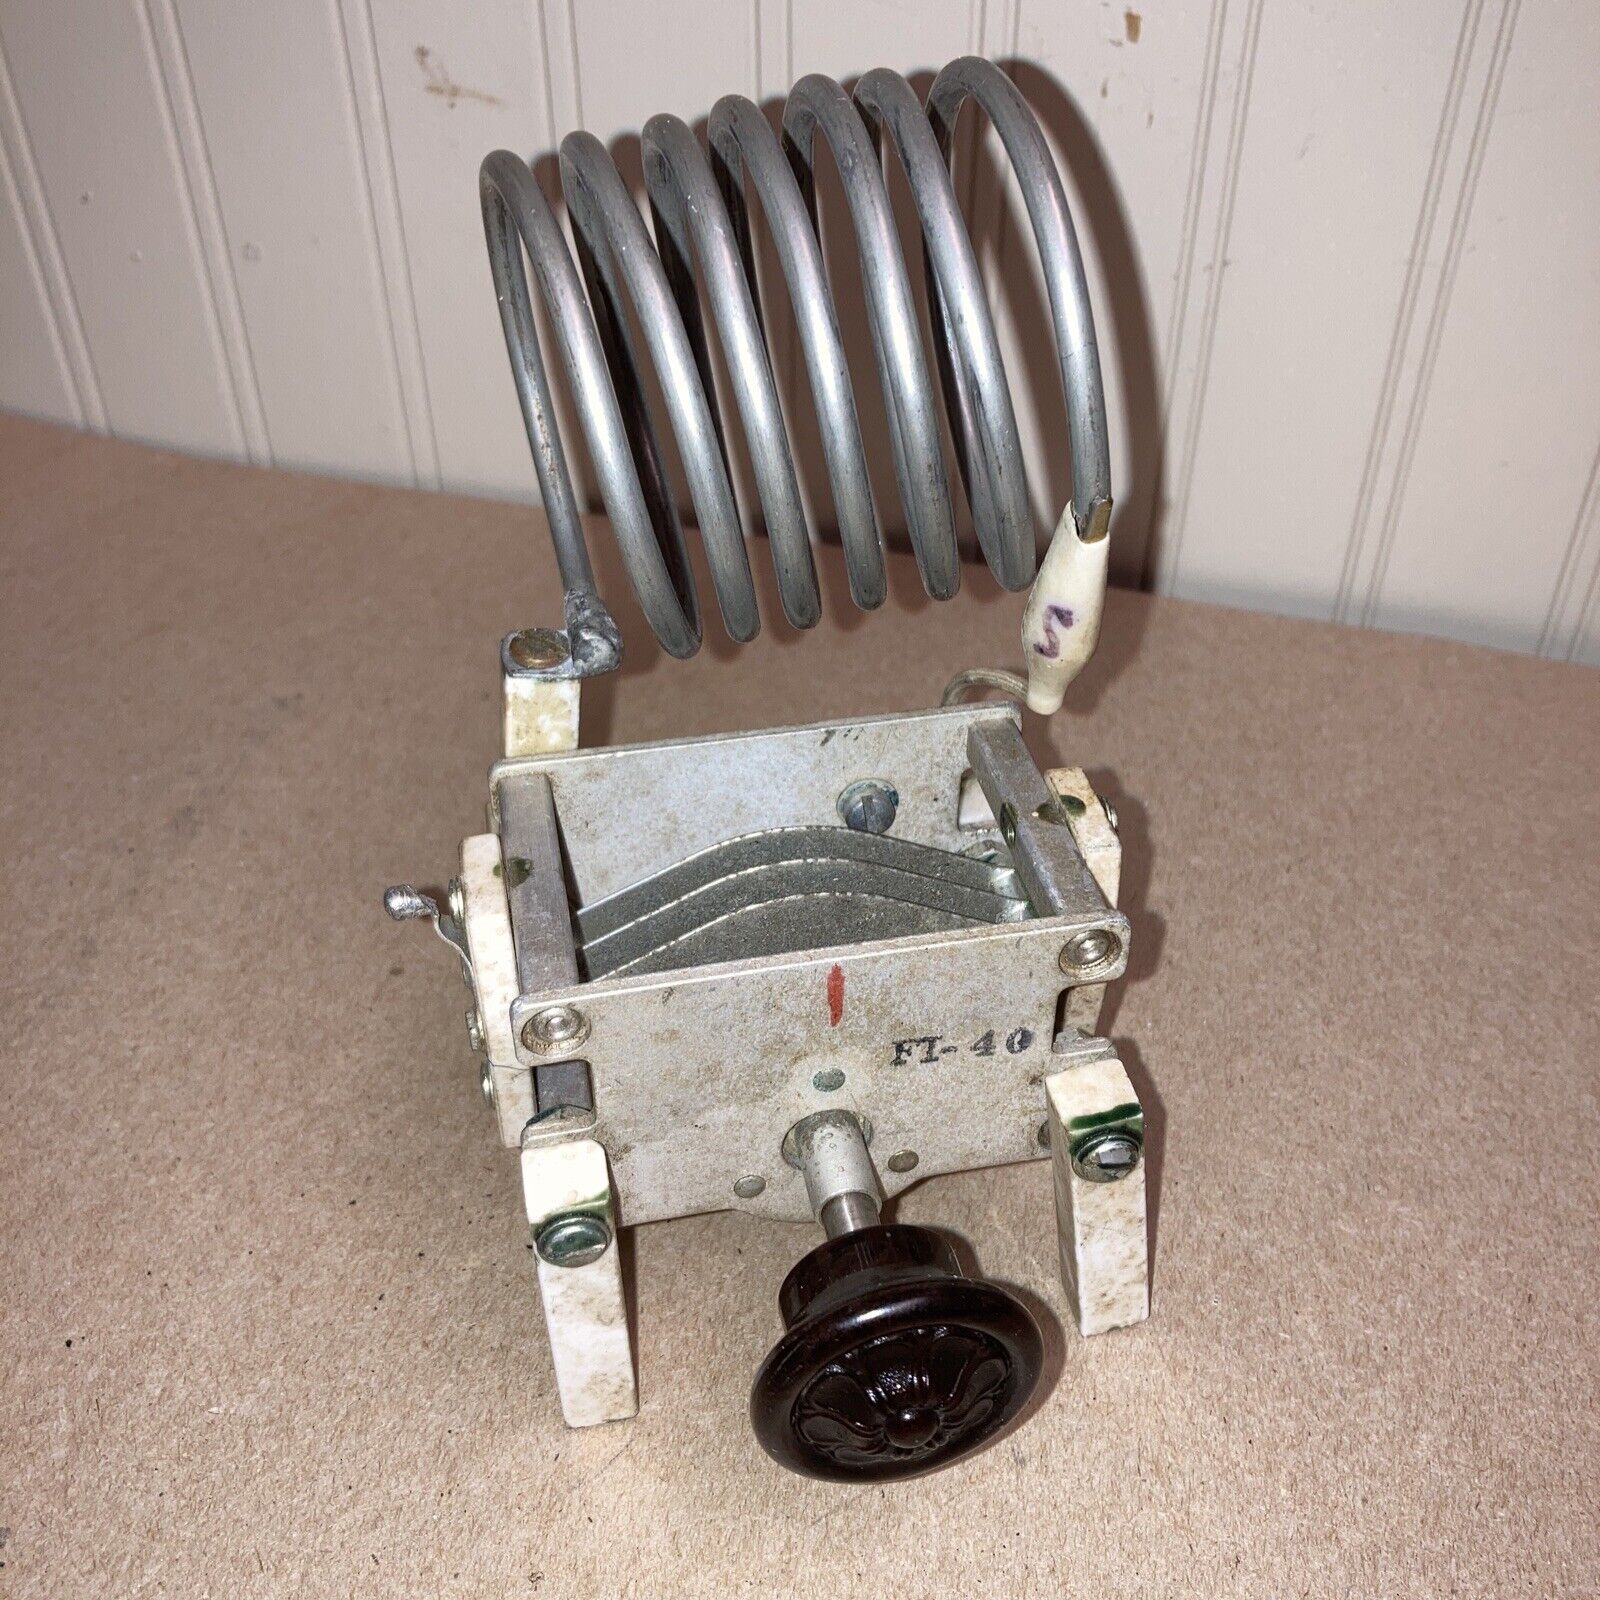 VINTAGE RADIO VARIABLE TUNING COIL FROM HAM ESTATE FI-40 ~ JOHNSON ?